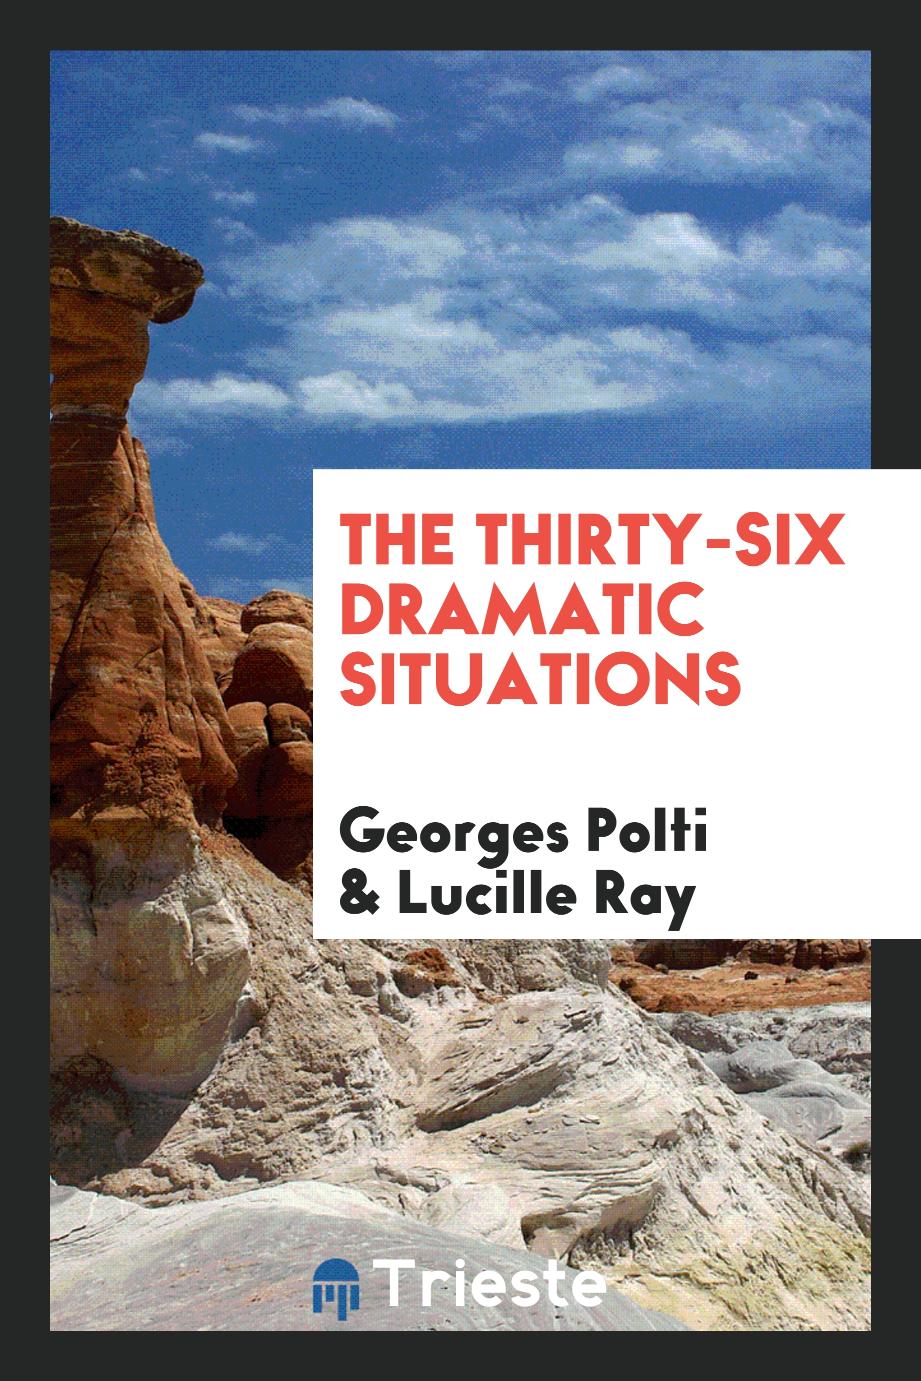 Georges Polti, Lucille Ray - The thirty-six dramatic situations